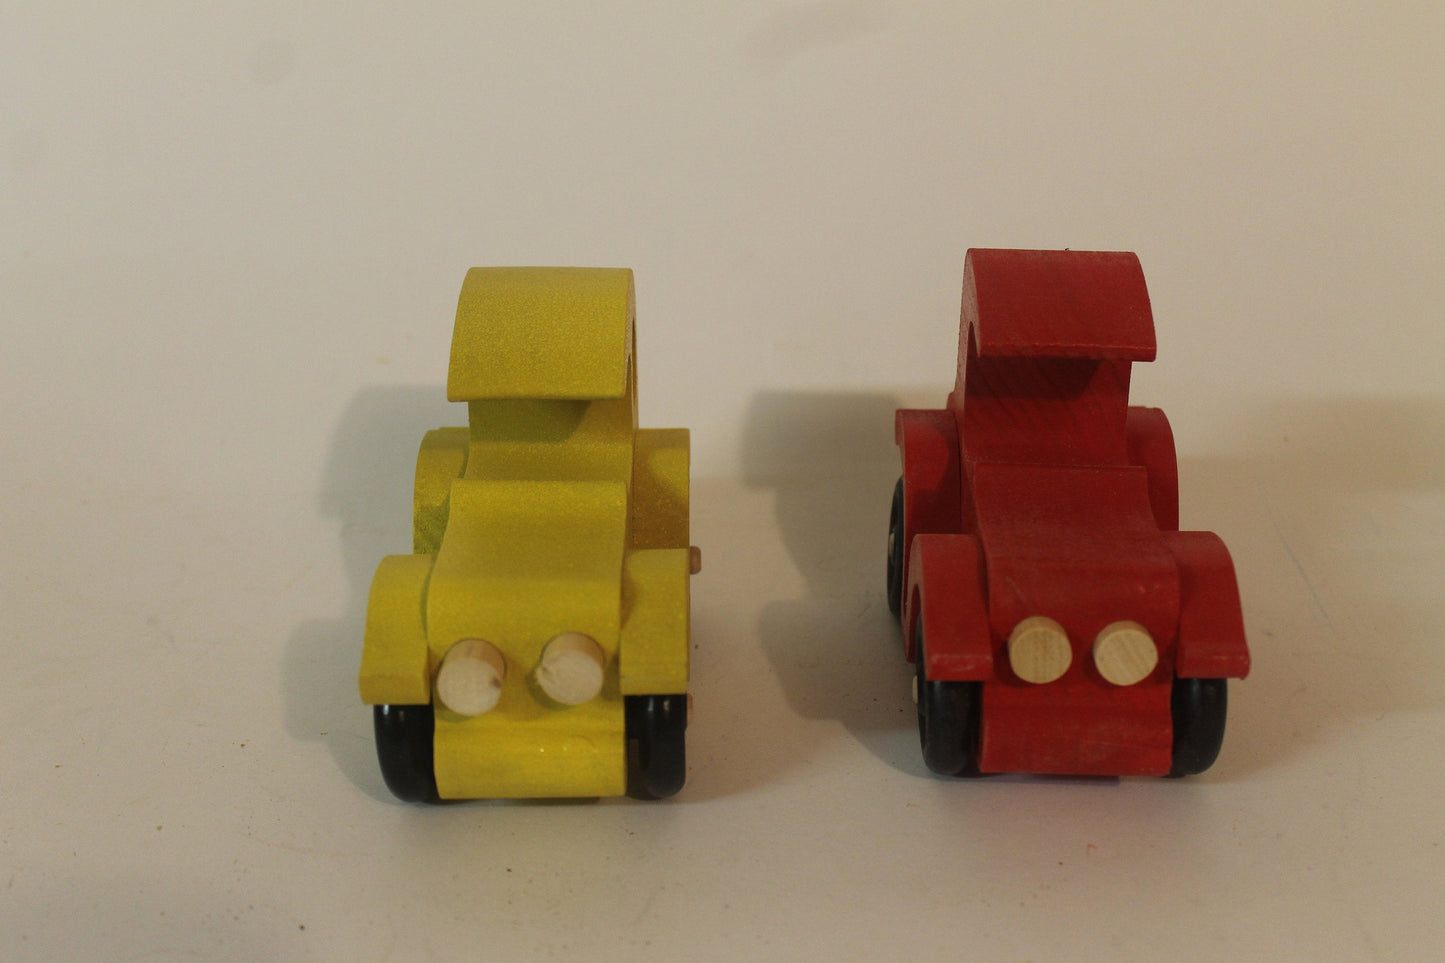 Two antique autos vehicle set. They are hand cut from solid poplar, have old type spoked wheels, and are painted bright red and yellow